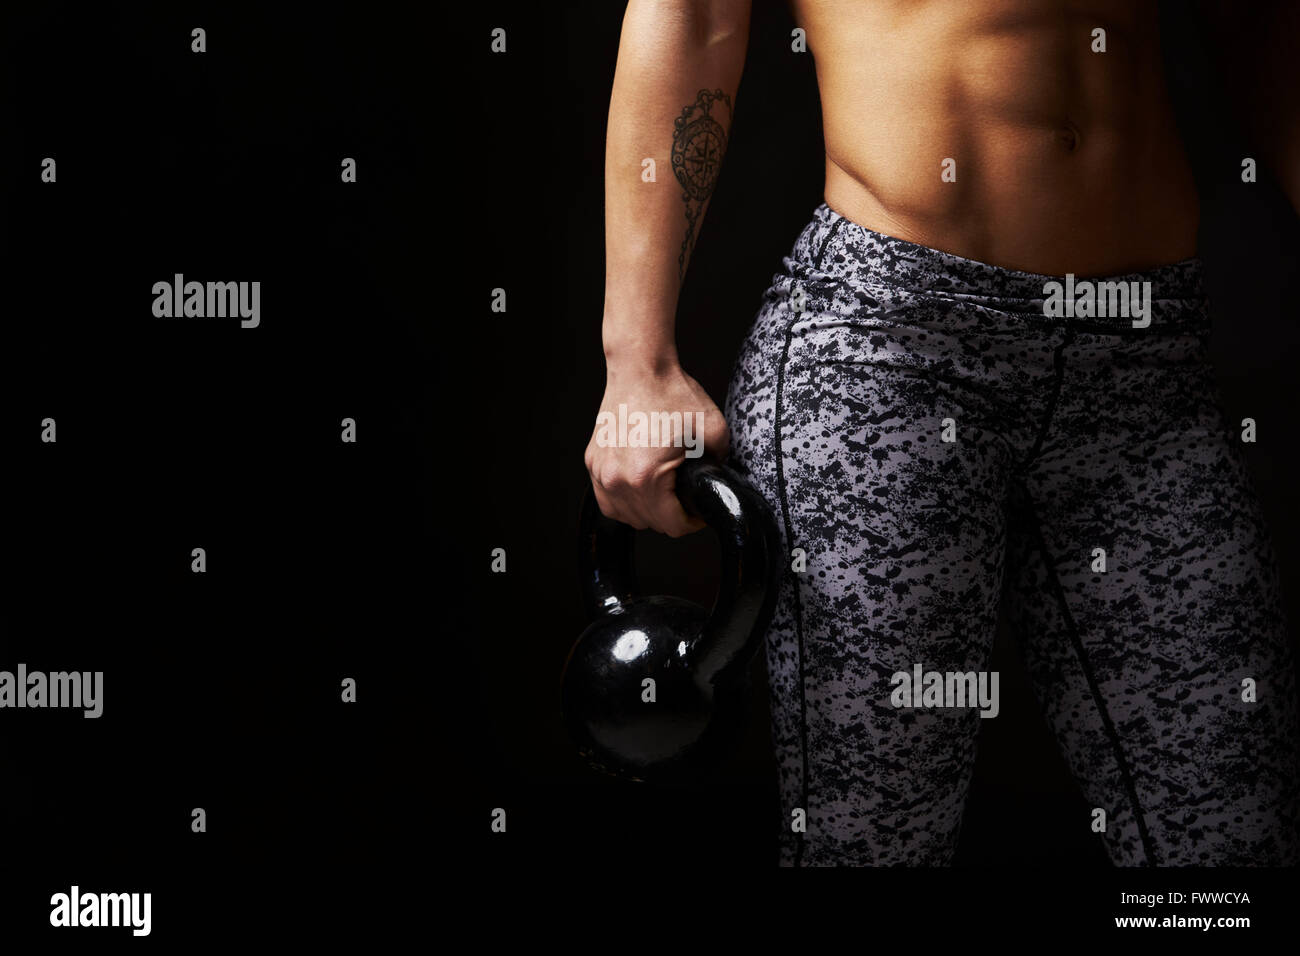 Mid-section crop of muscular young woman holding kettlebell Stock Photo